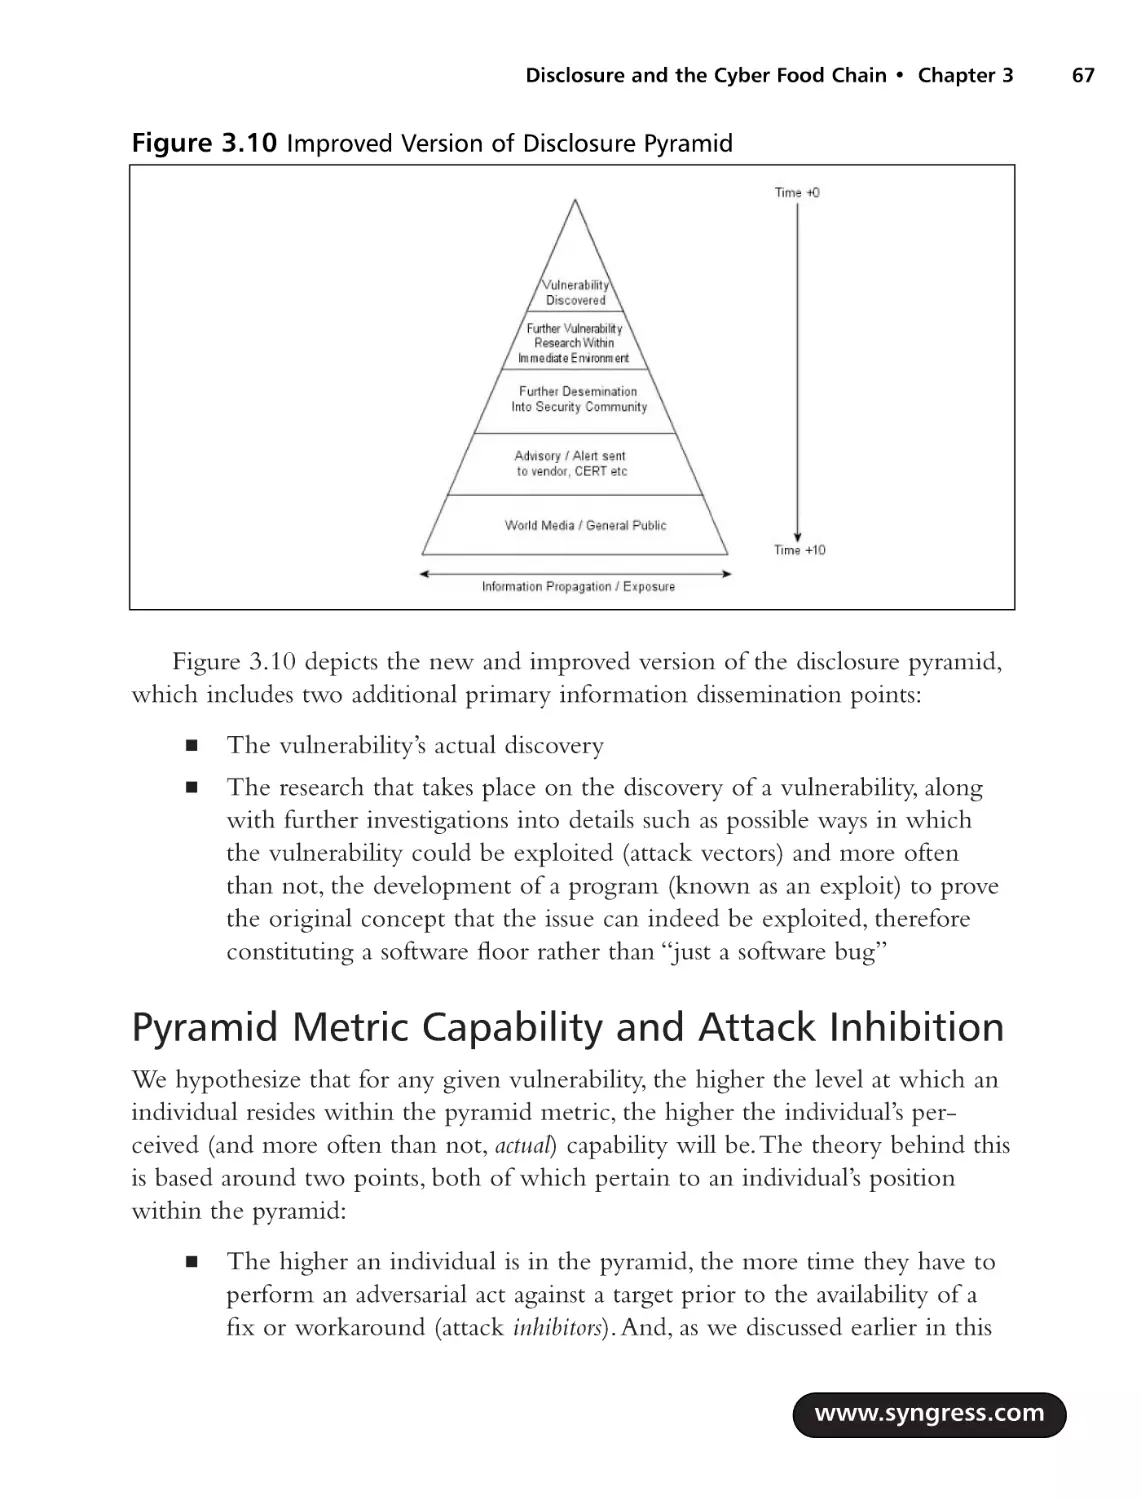 Pyramid Metric Capability and Attack Inhibition